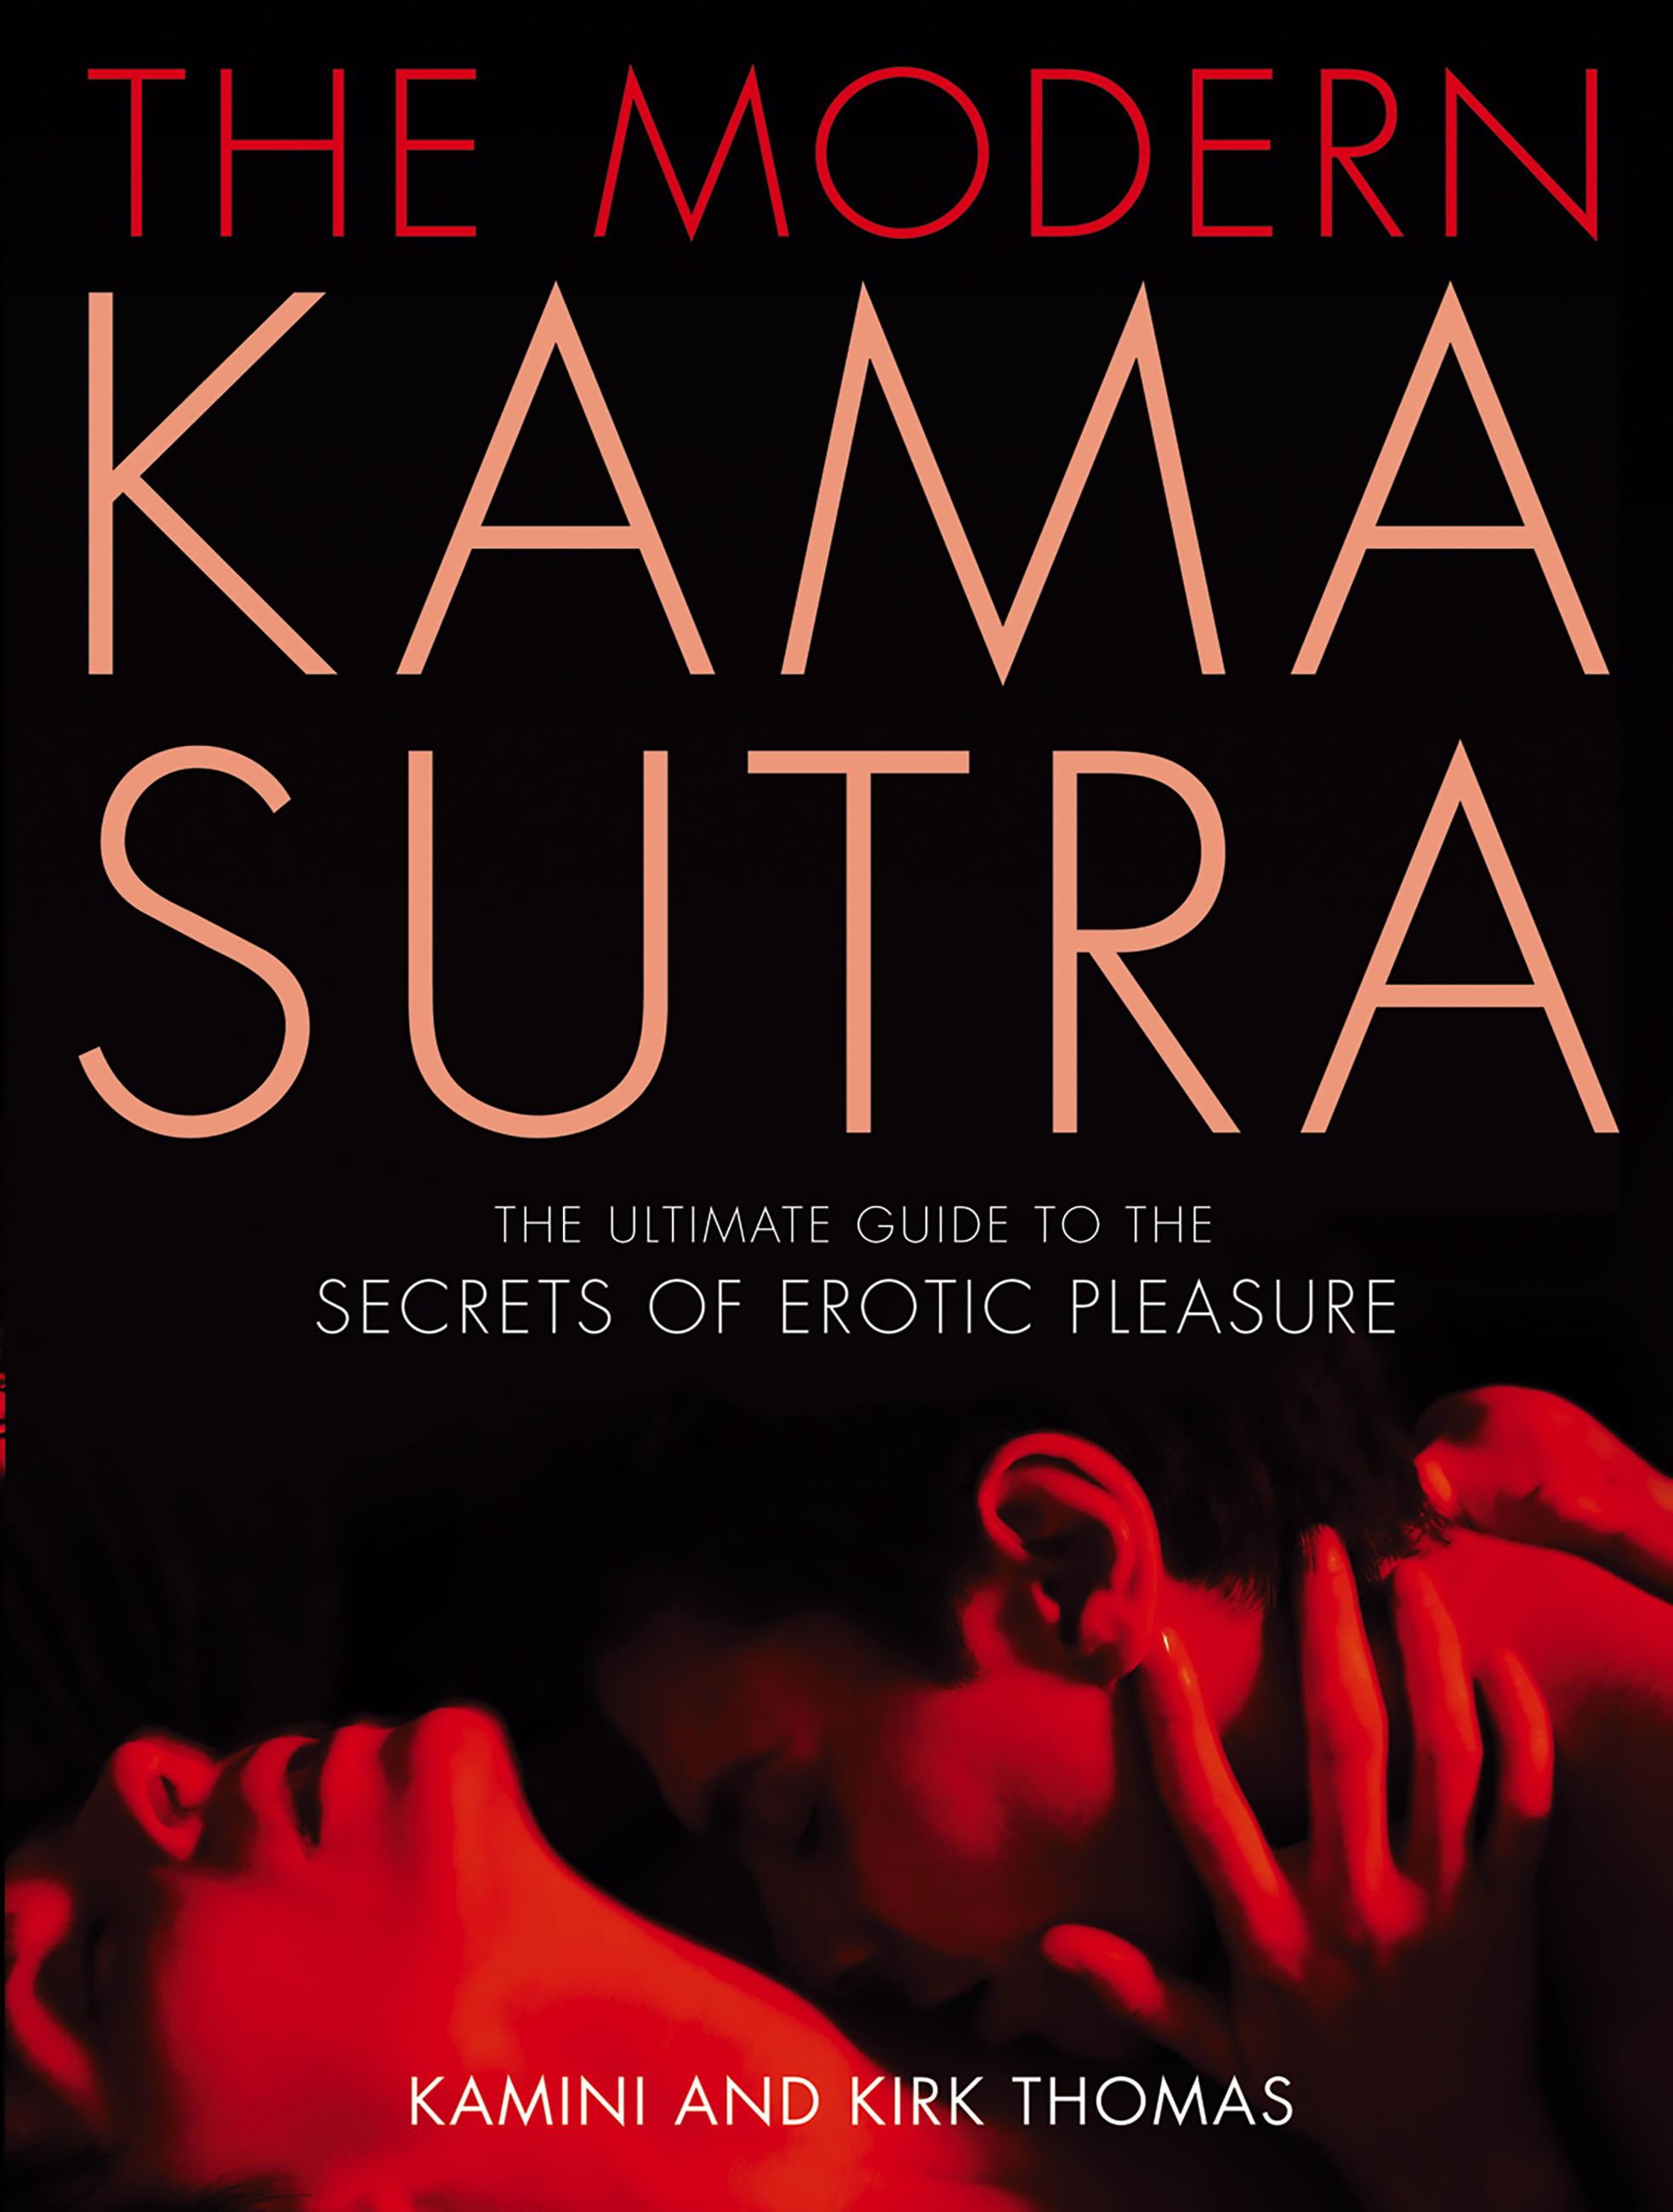 Best of Kamasutra step by step